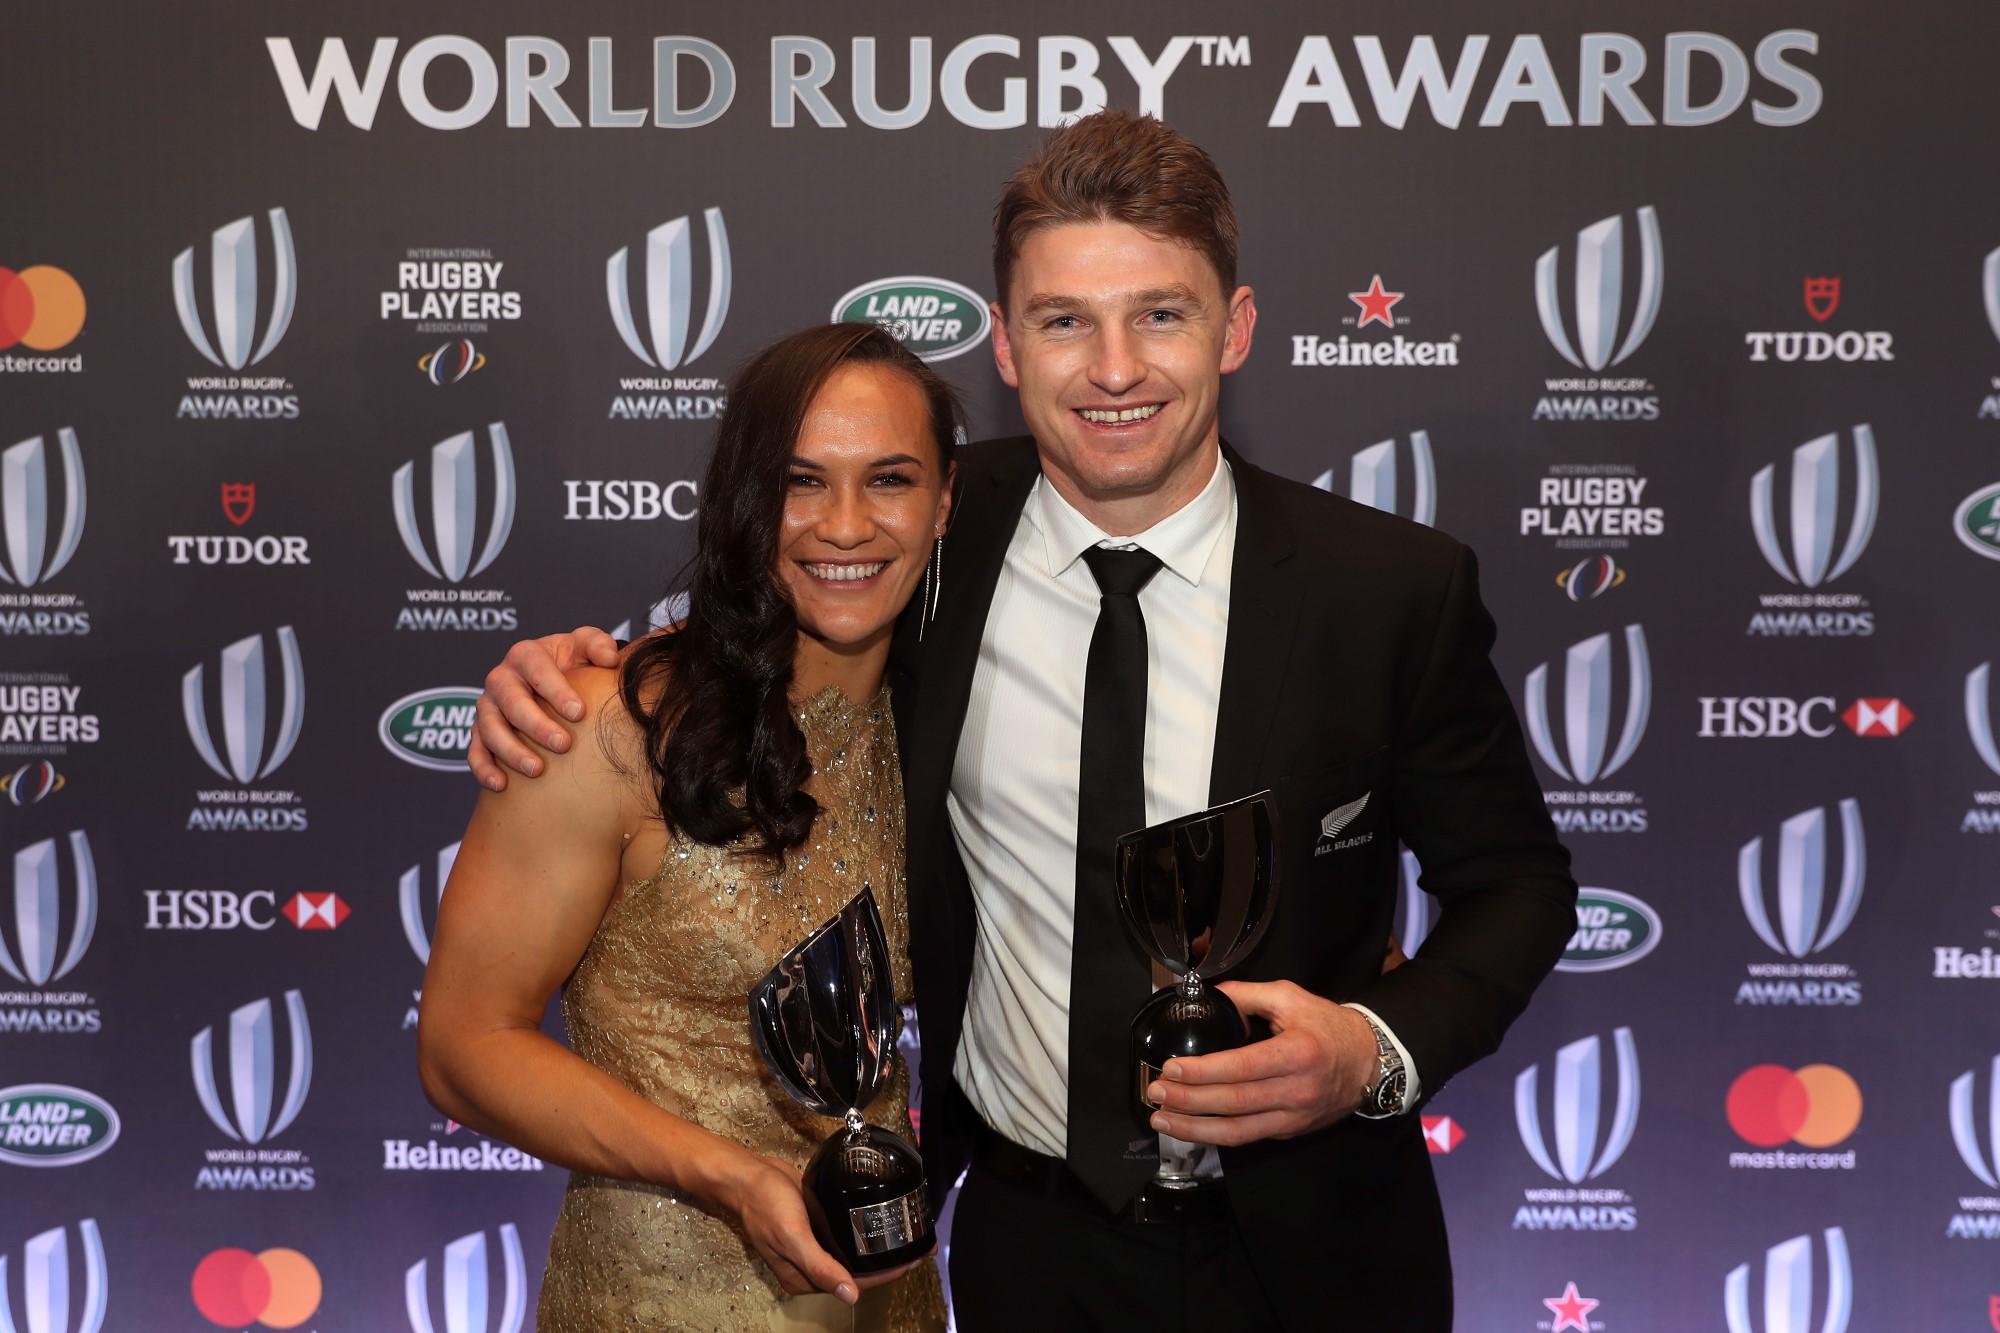 Six awards go to New Zealander players at world rugby players awards